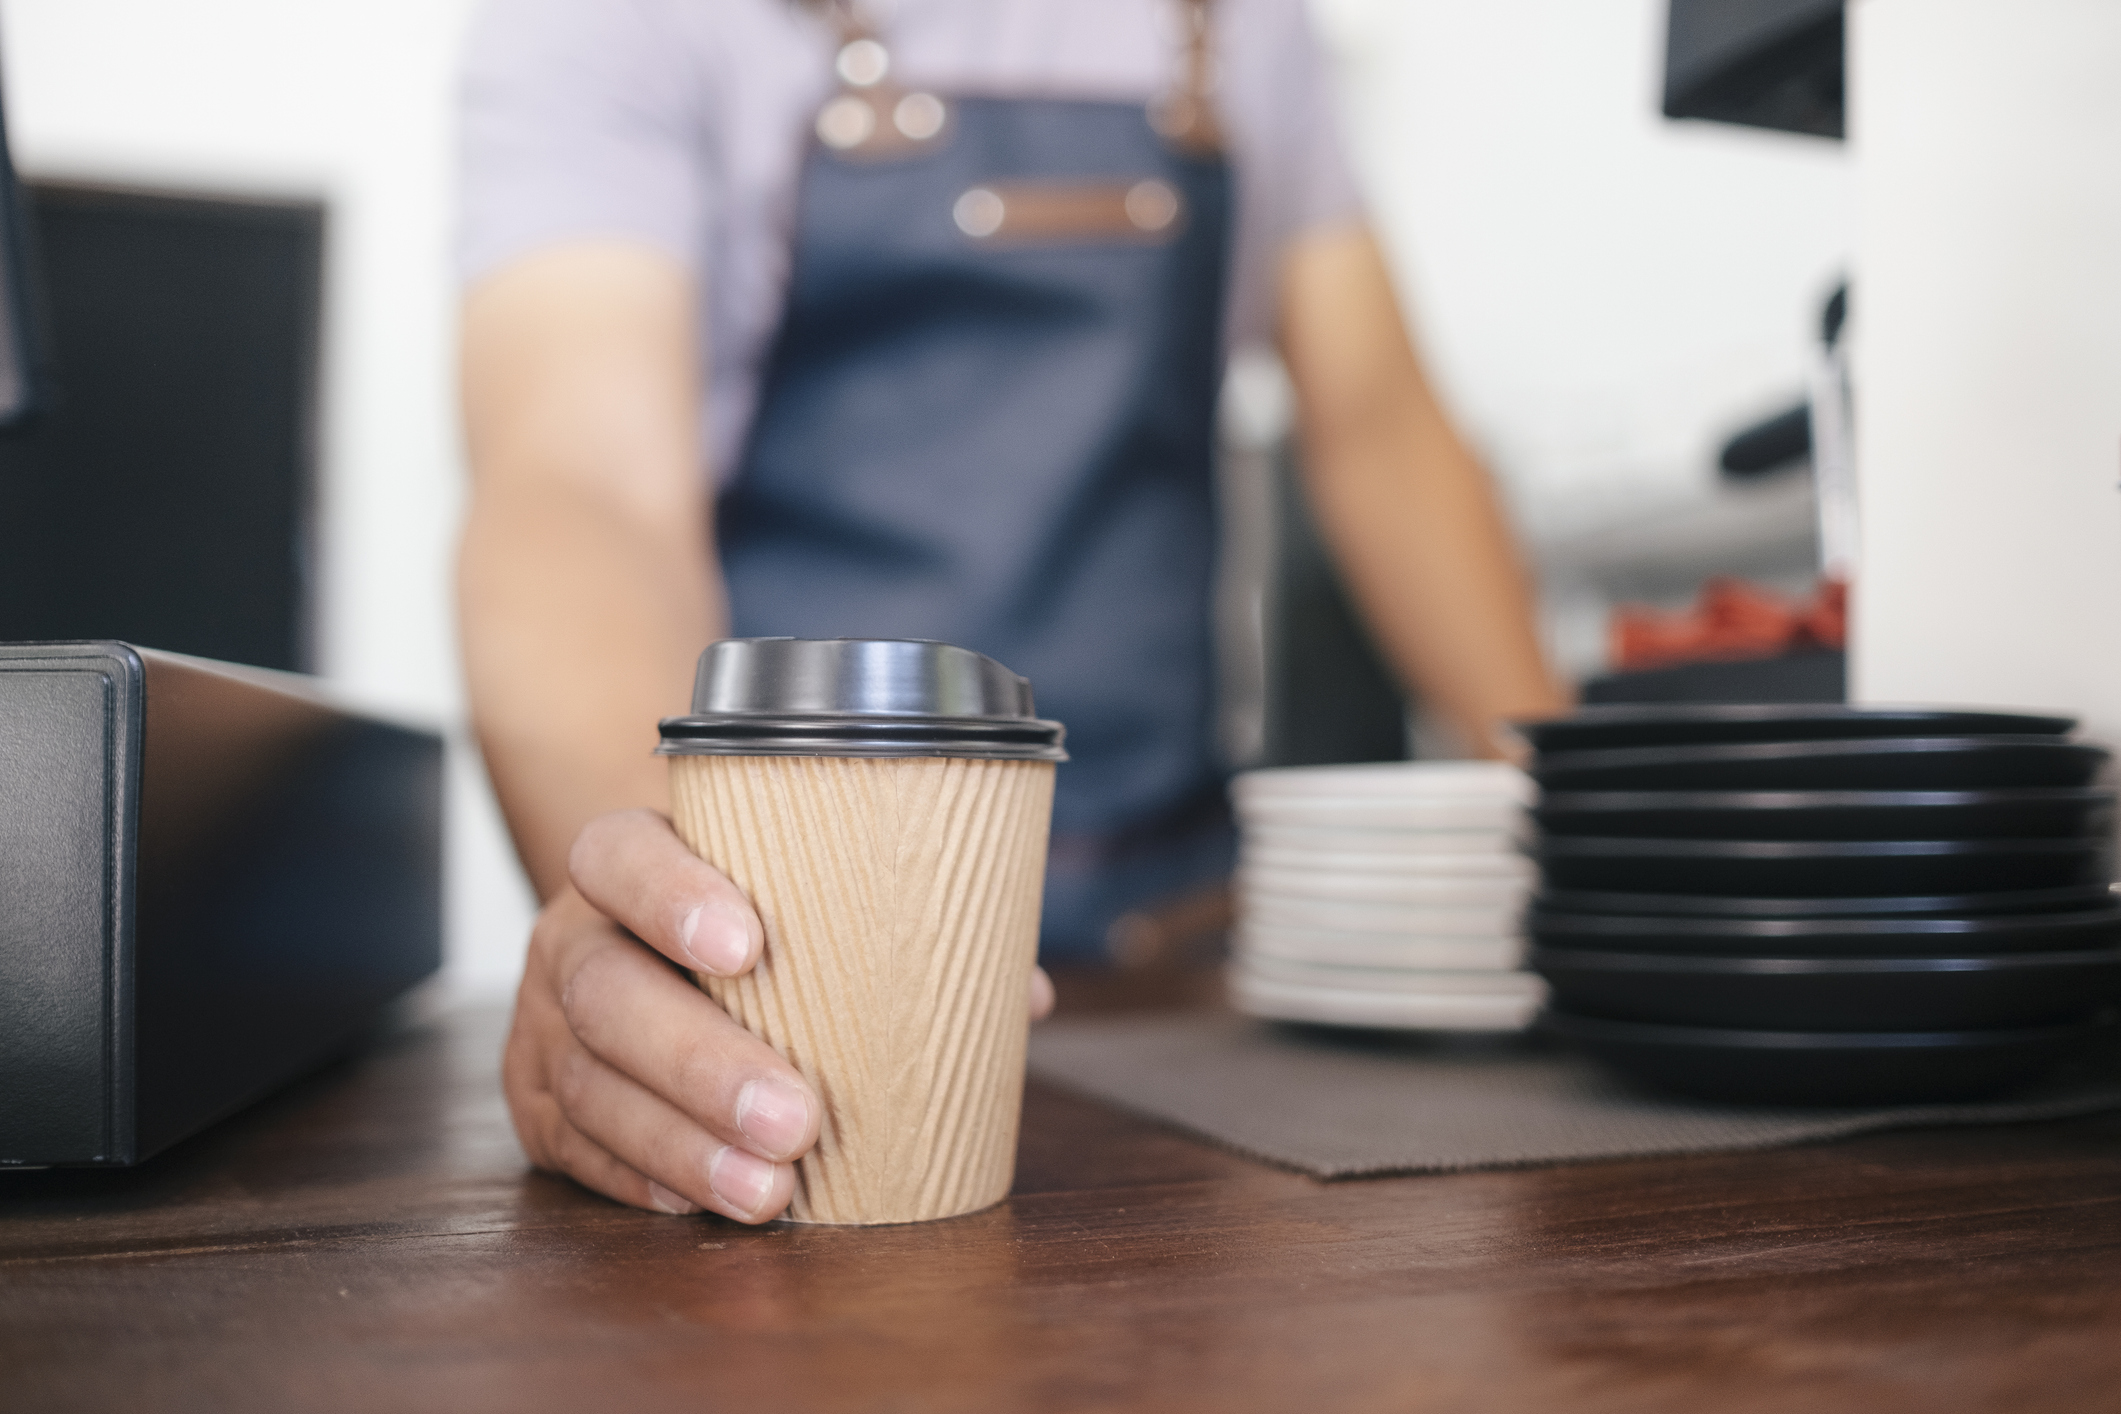 Stock Image of a Barista Sliding a Paper Cup of Coffee Toward the Camera